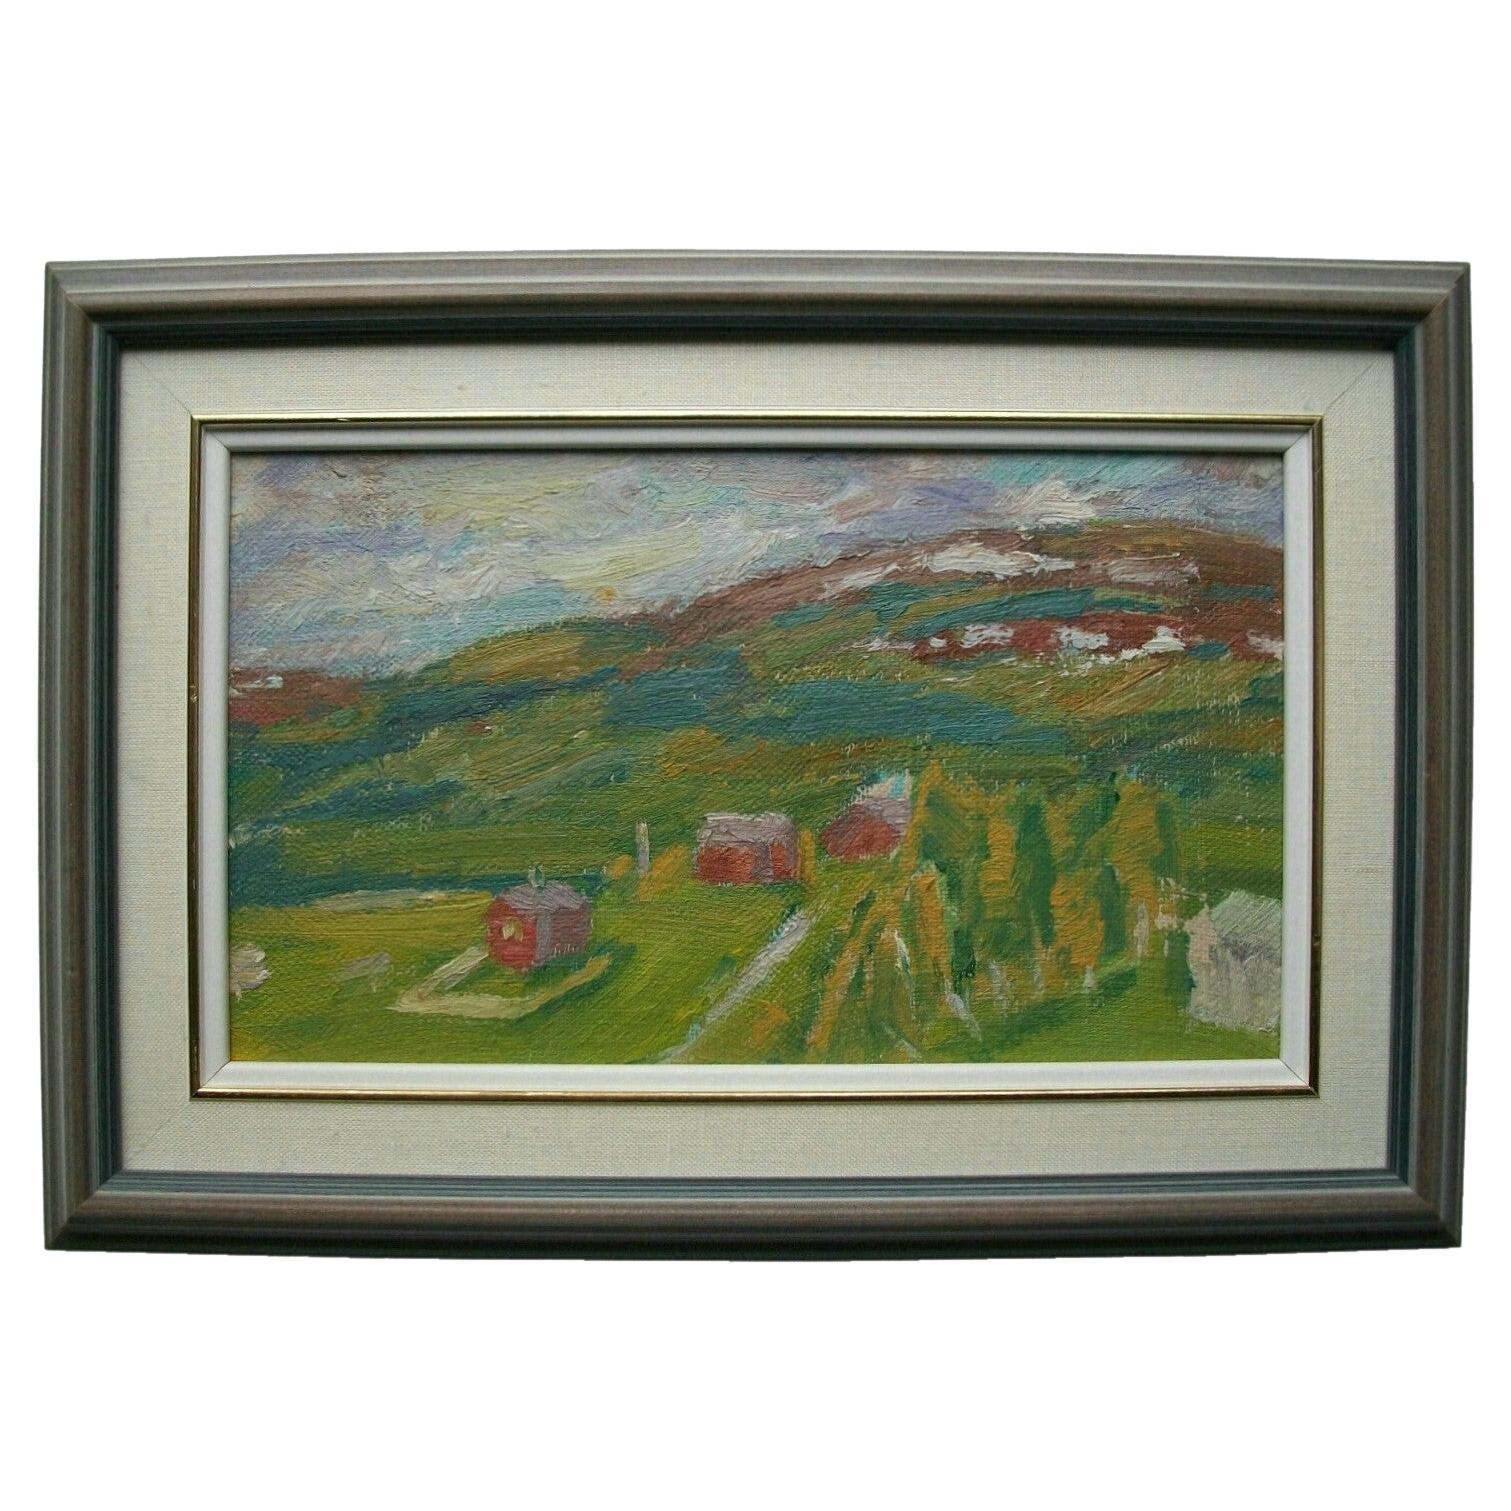 Vintage Impressionist Oil Painting - Unsigned - Framed - Canada - Mid 20th C. For Sale